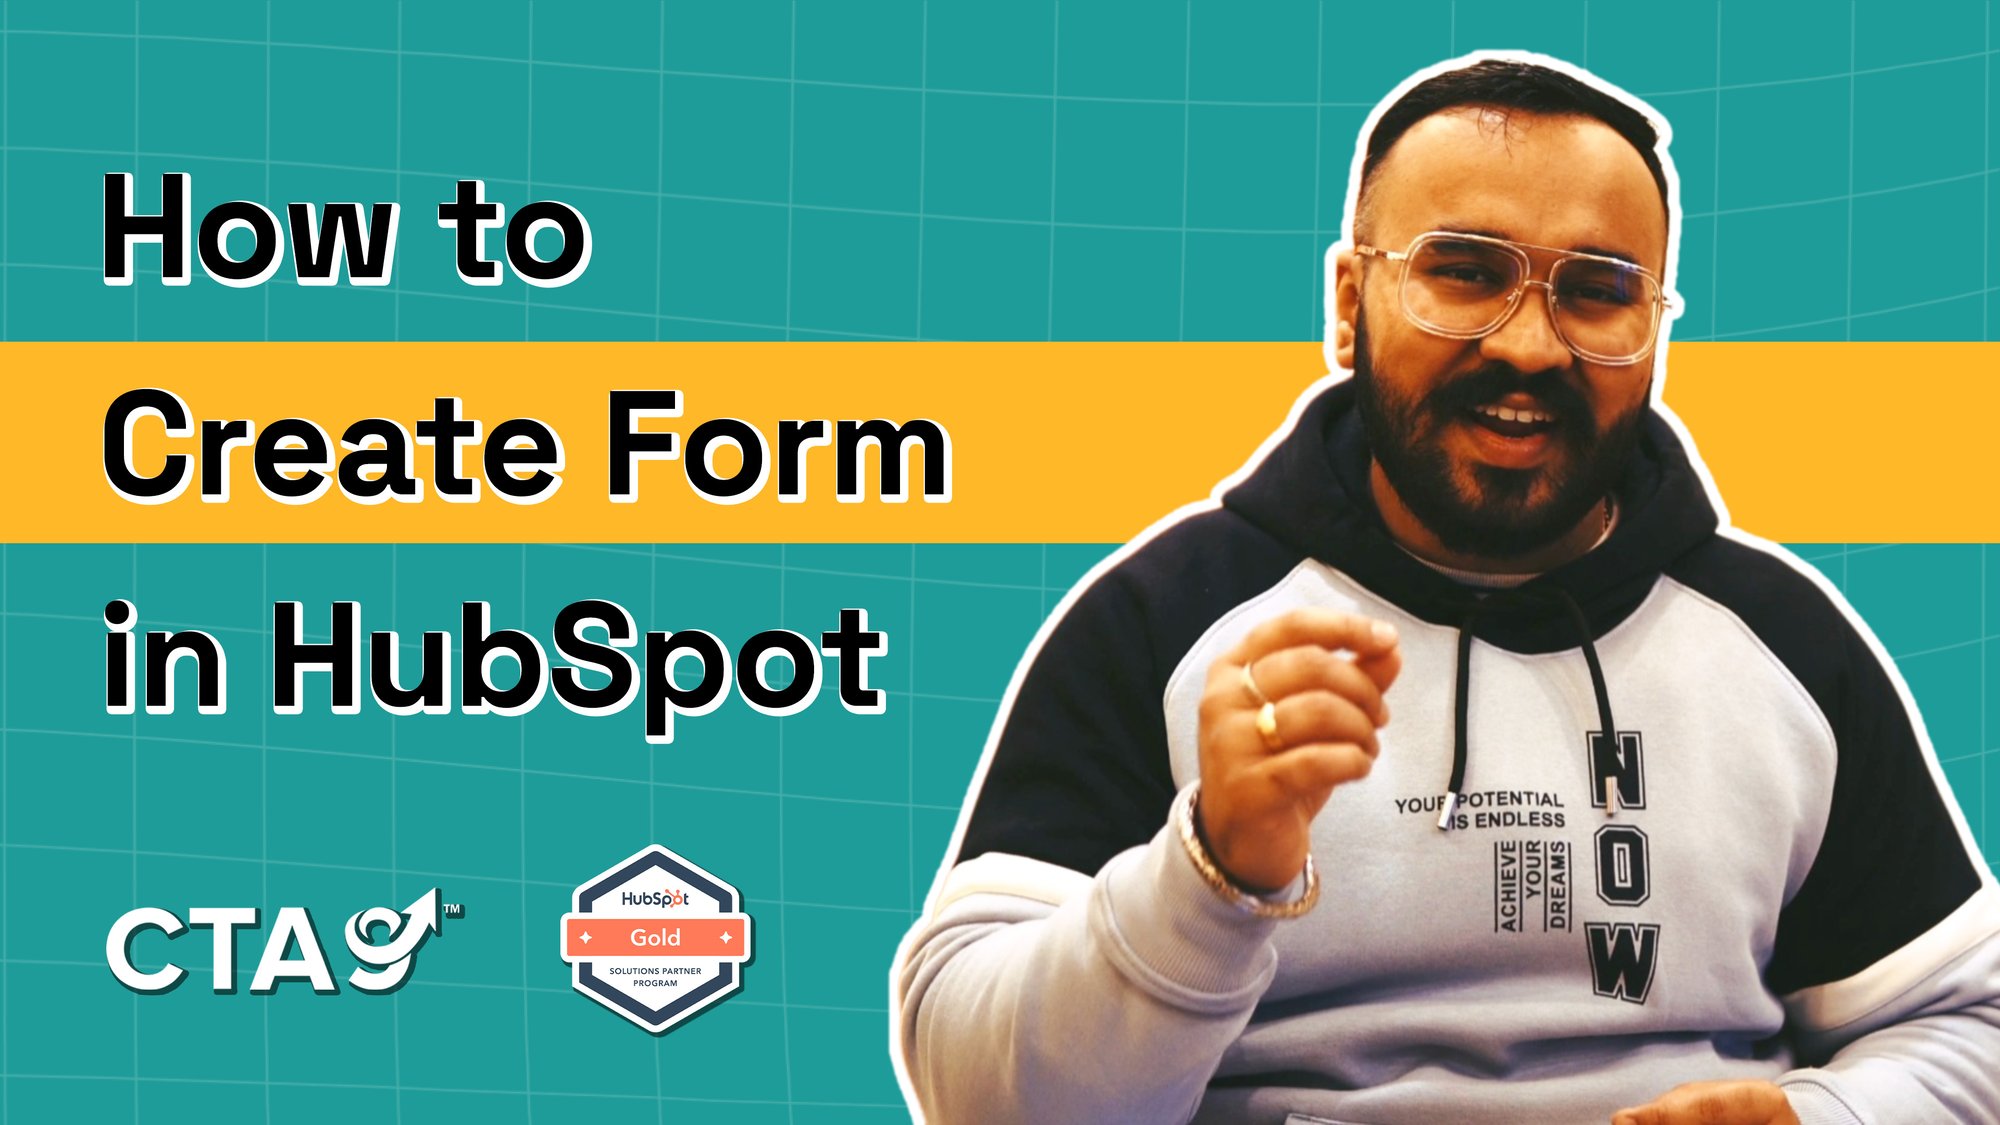 How to Create Form in HubSpot